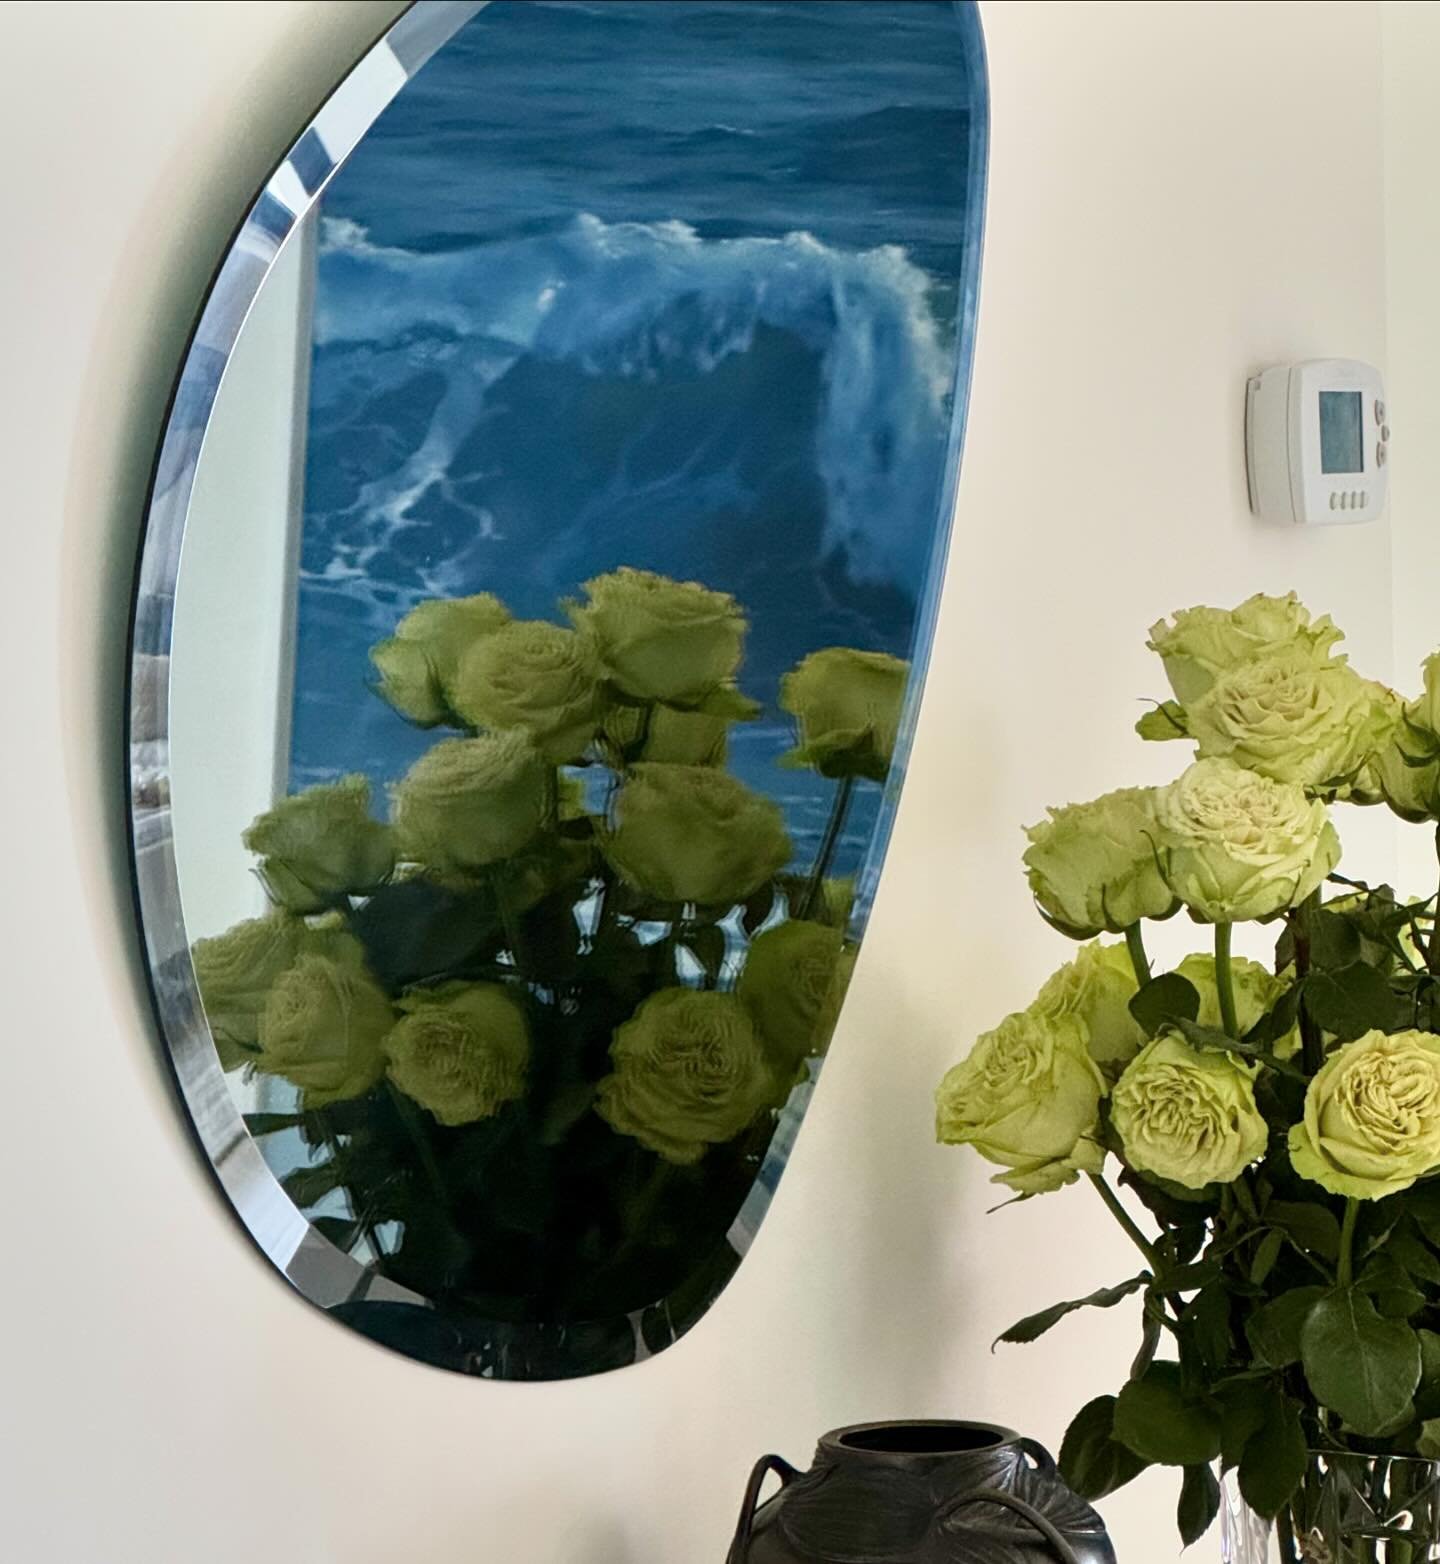 A mirror almost anywhere, but especially in an entrance ( on a perpendicular wall) not only doubles beauty and expansion but activates and welcomes in good energy.  Double the good chi, double your wellbeing.
-
-
-

#omforthehome #carriekeskowitzinte